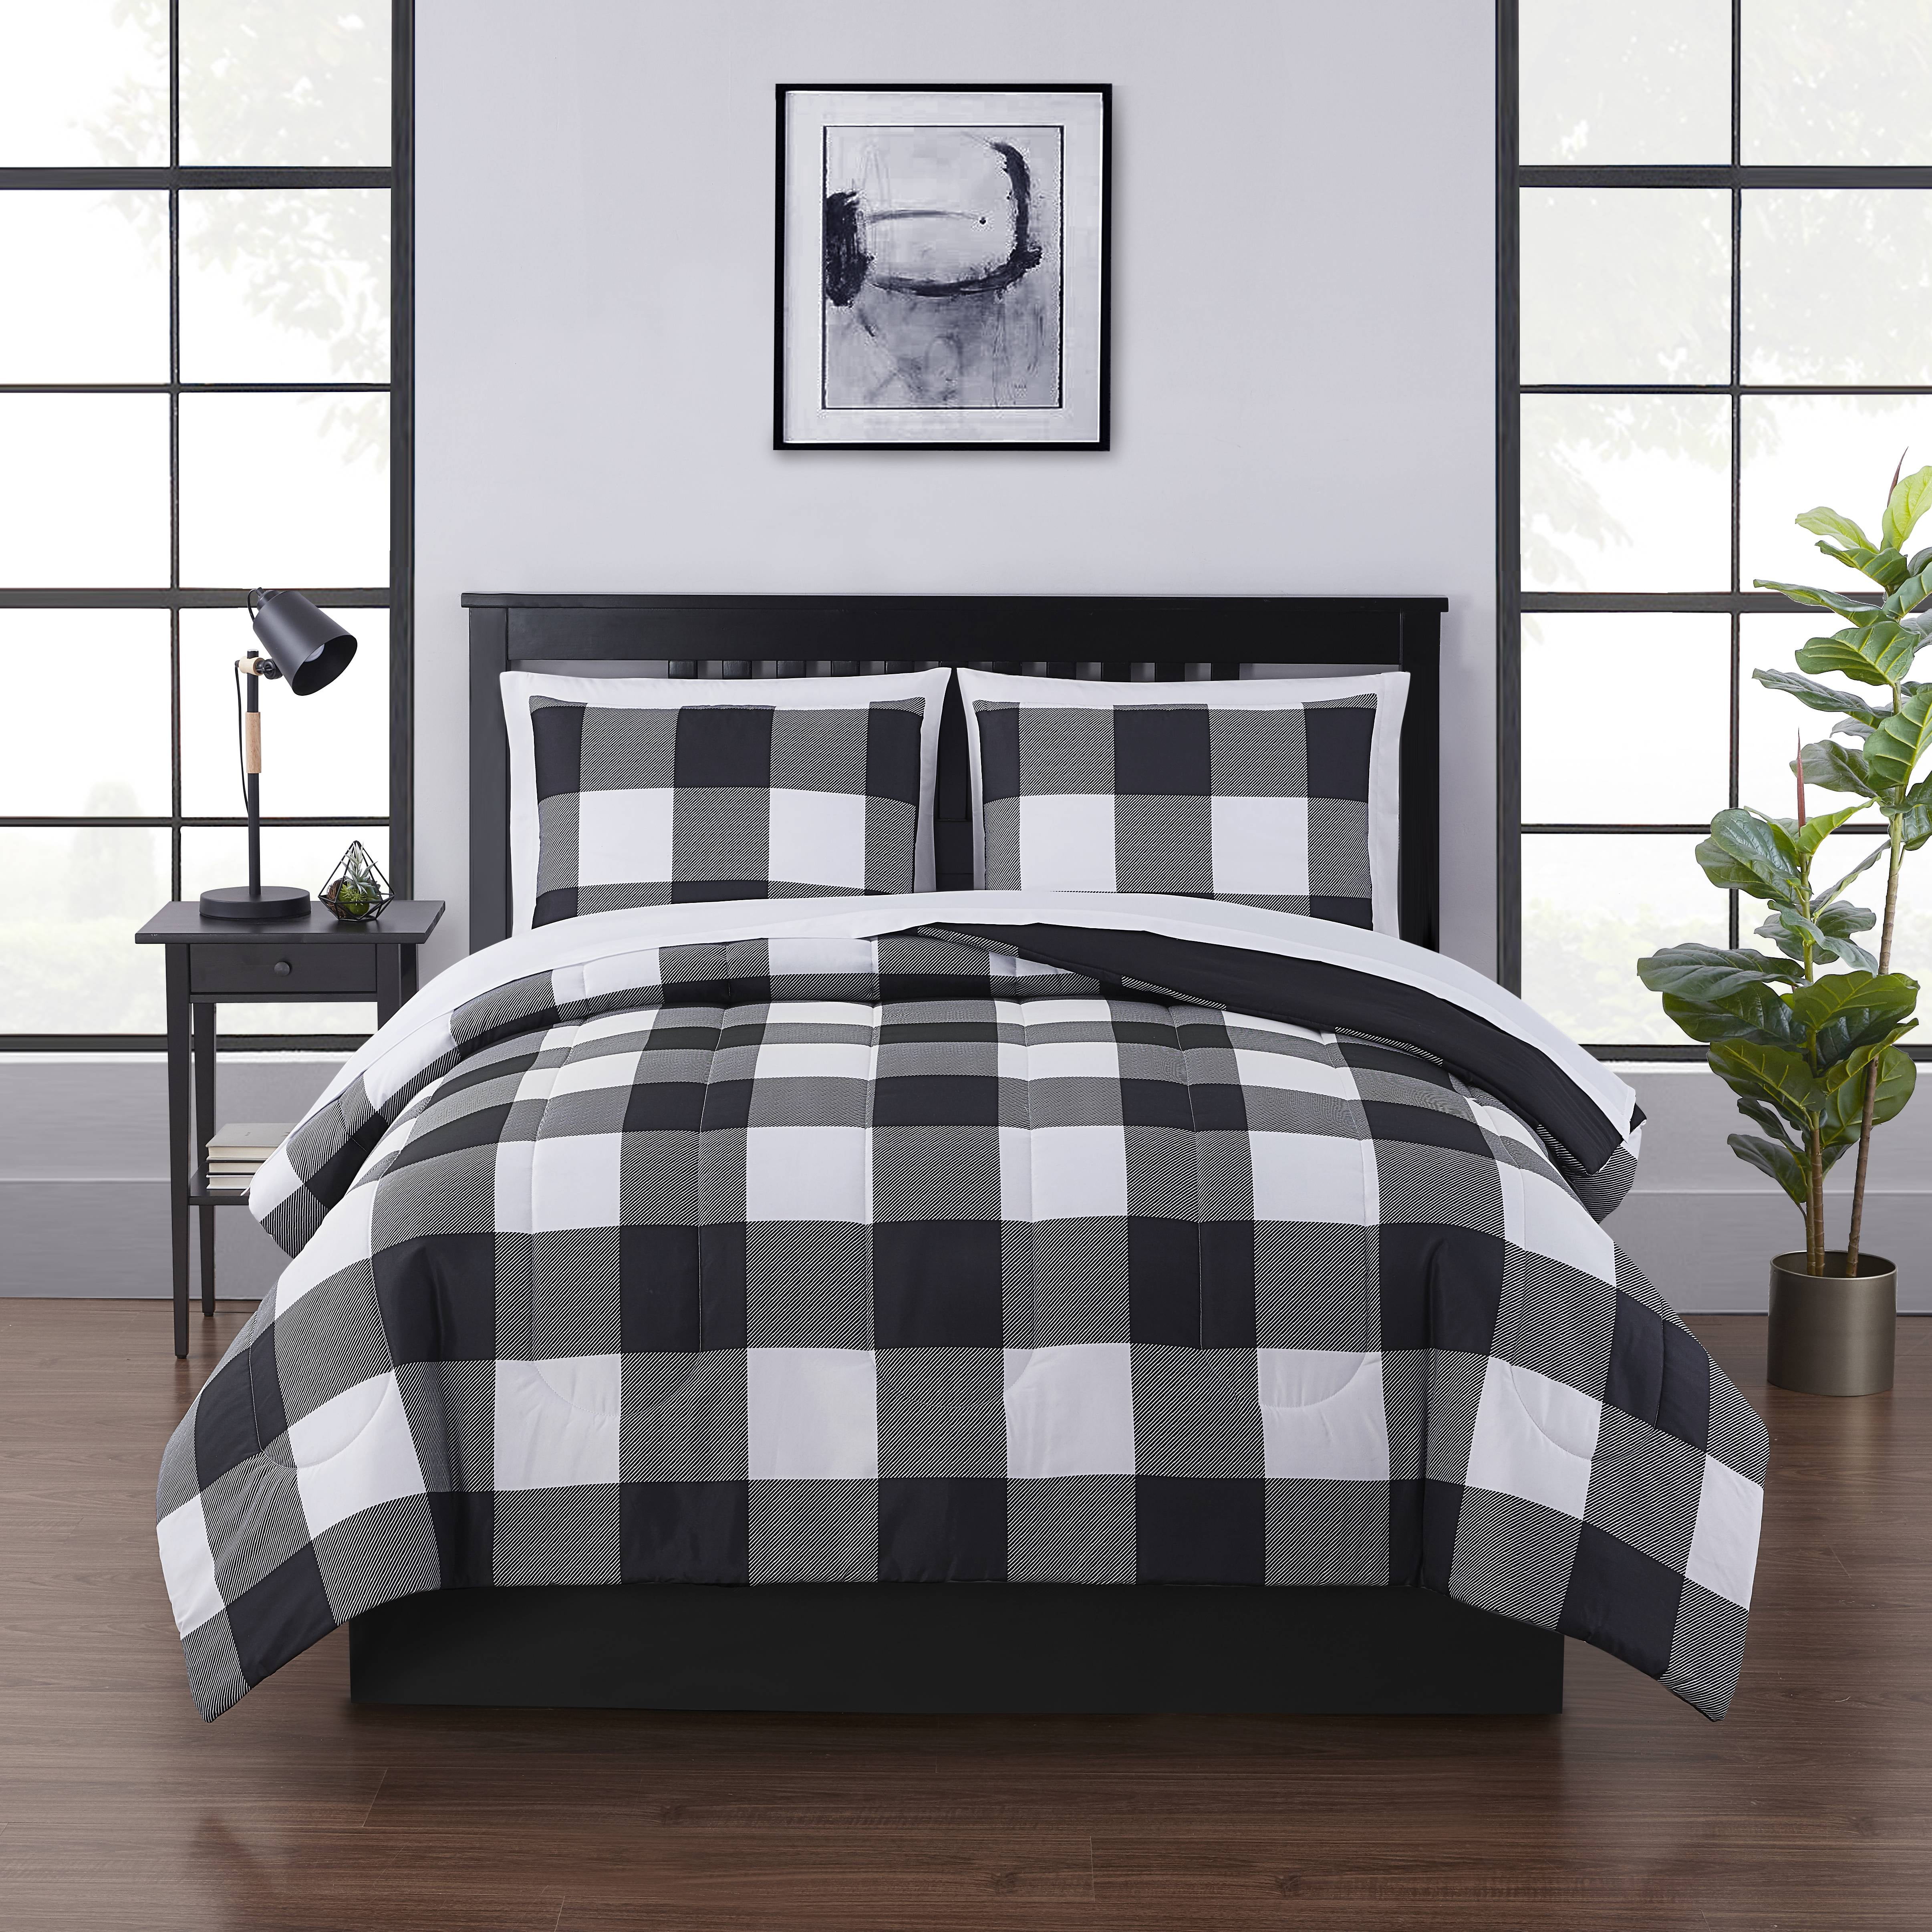 Mainstays Black White Buffalo Check, Black And White Twin Bed Comforter Sets